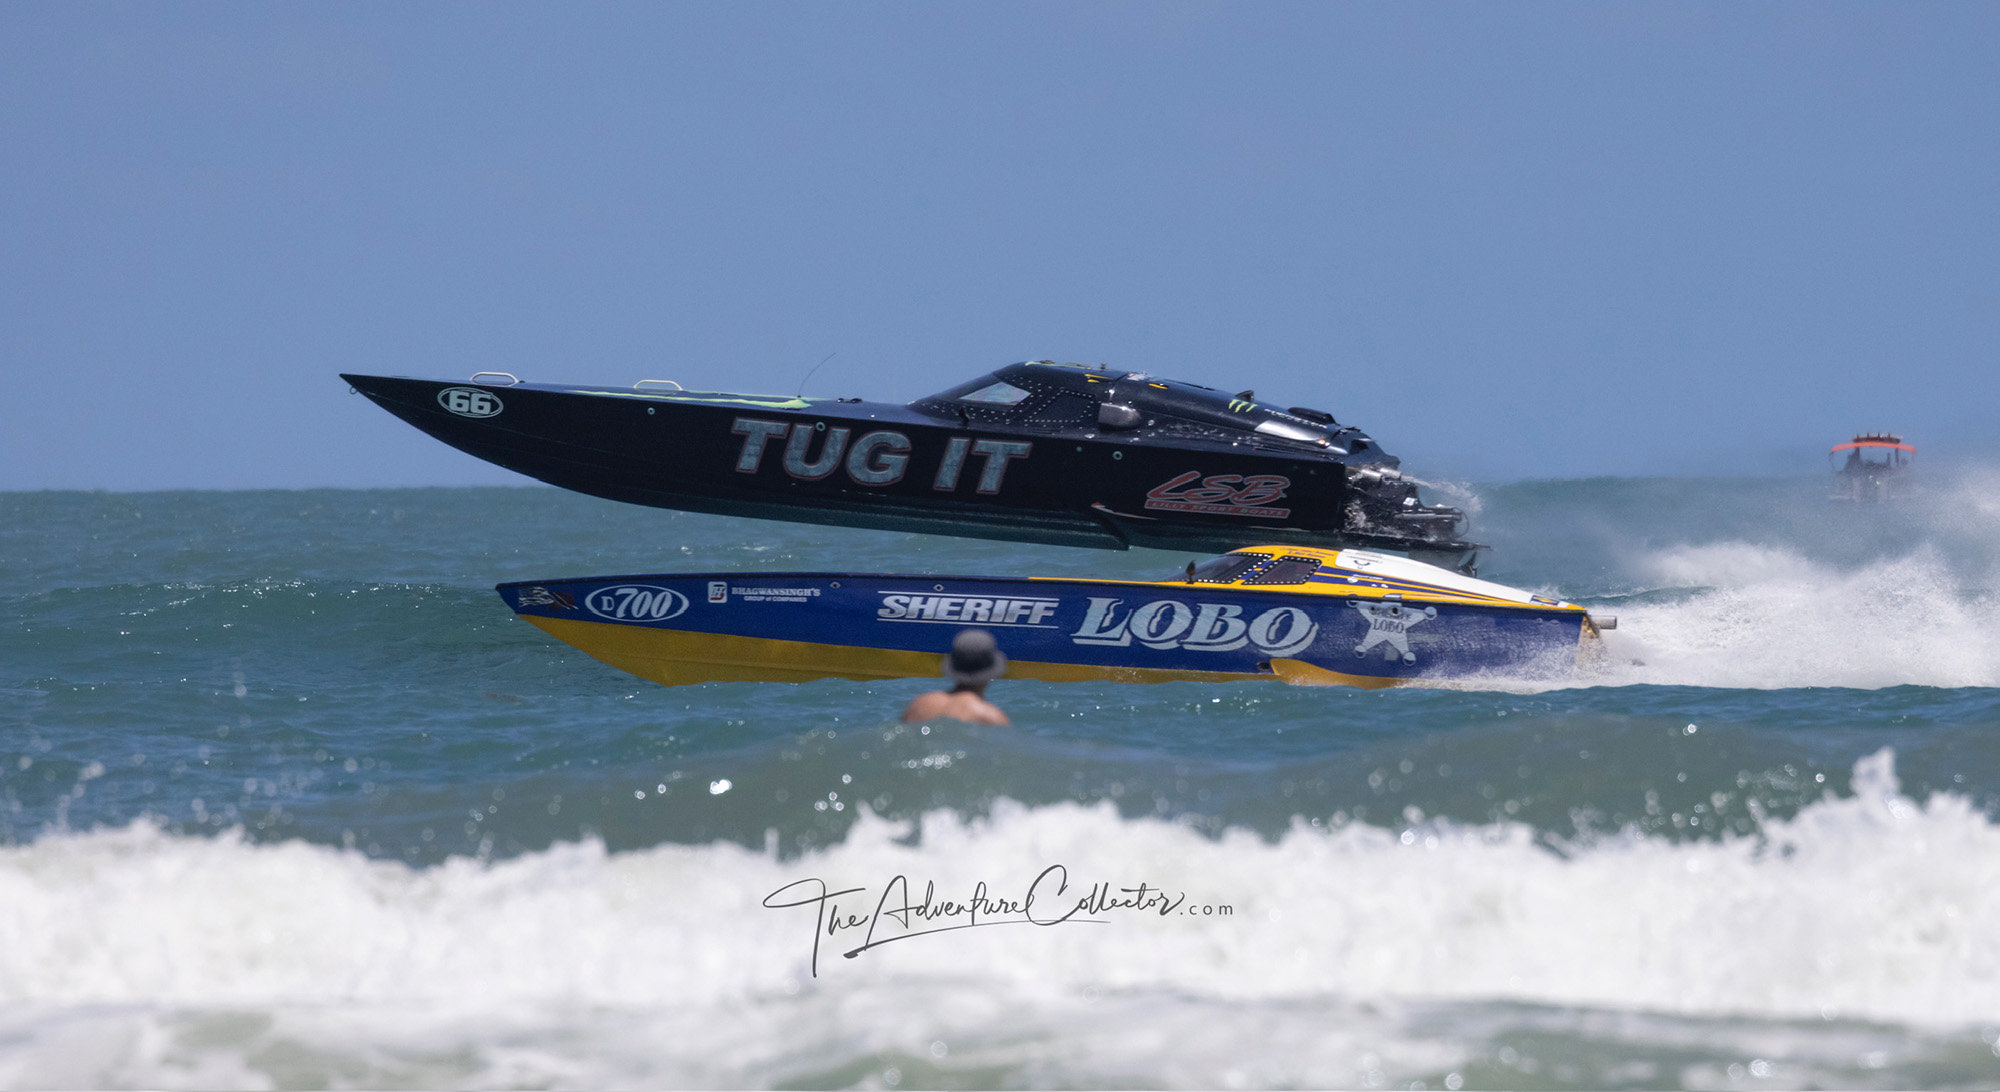 Offshore Power Boat Association Racing. Two boats go head to head in front of swimmer in ocean.